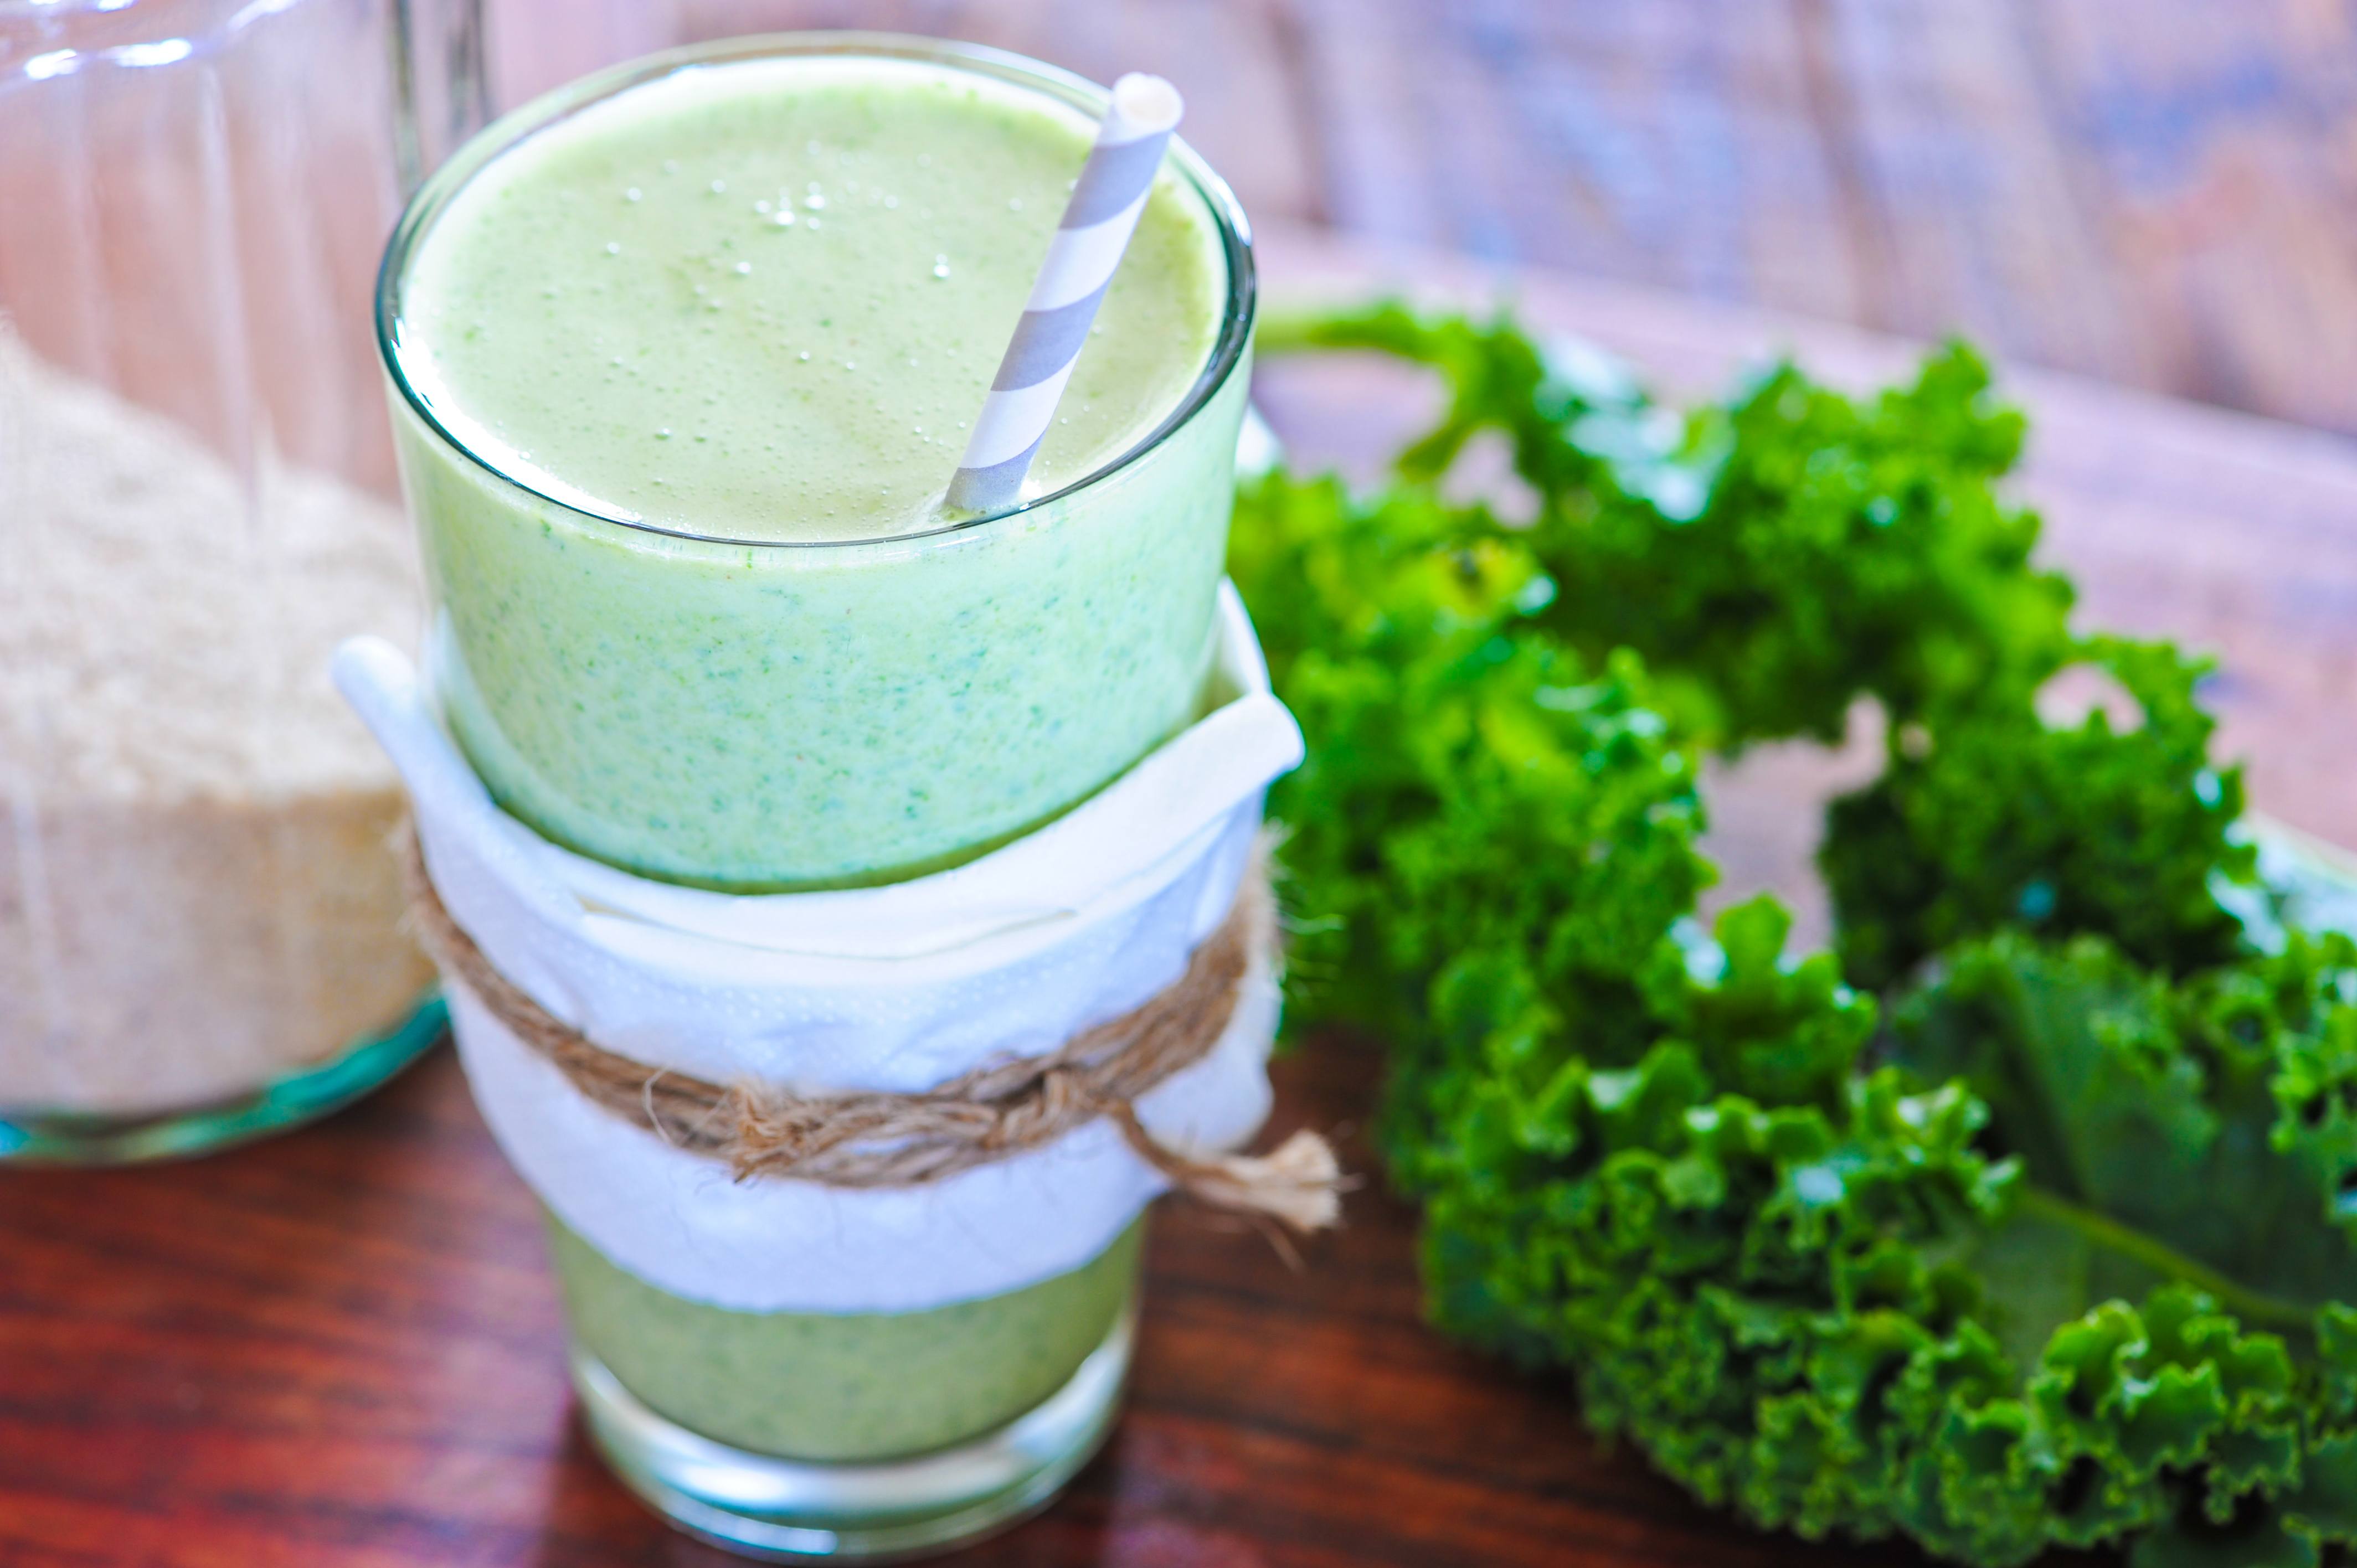 Best For Losing Weight: 15 Smoothies For Breakfast